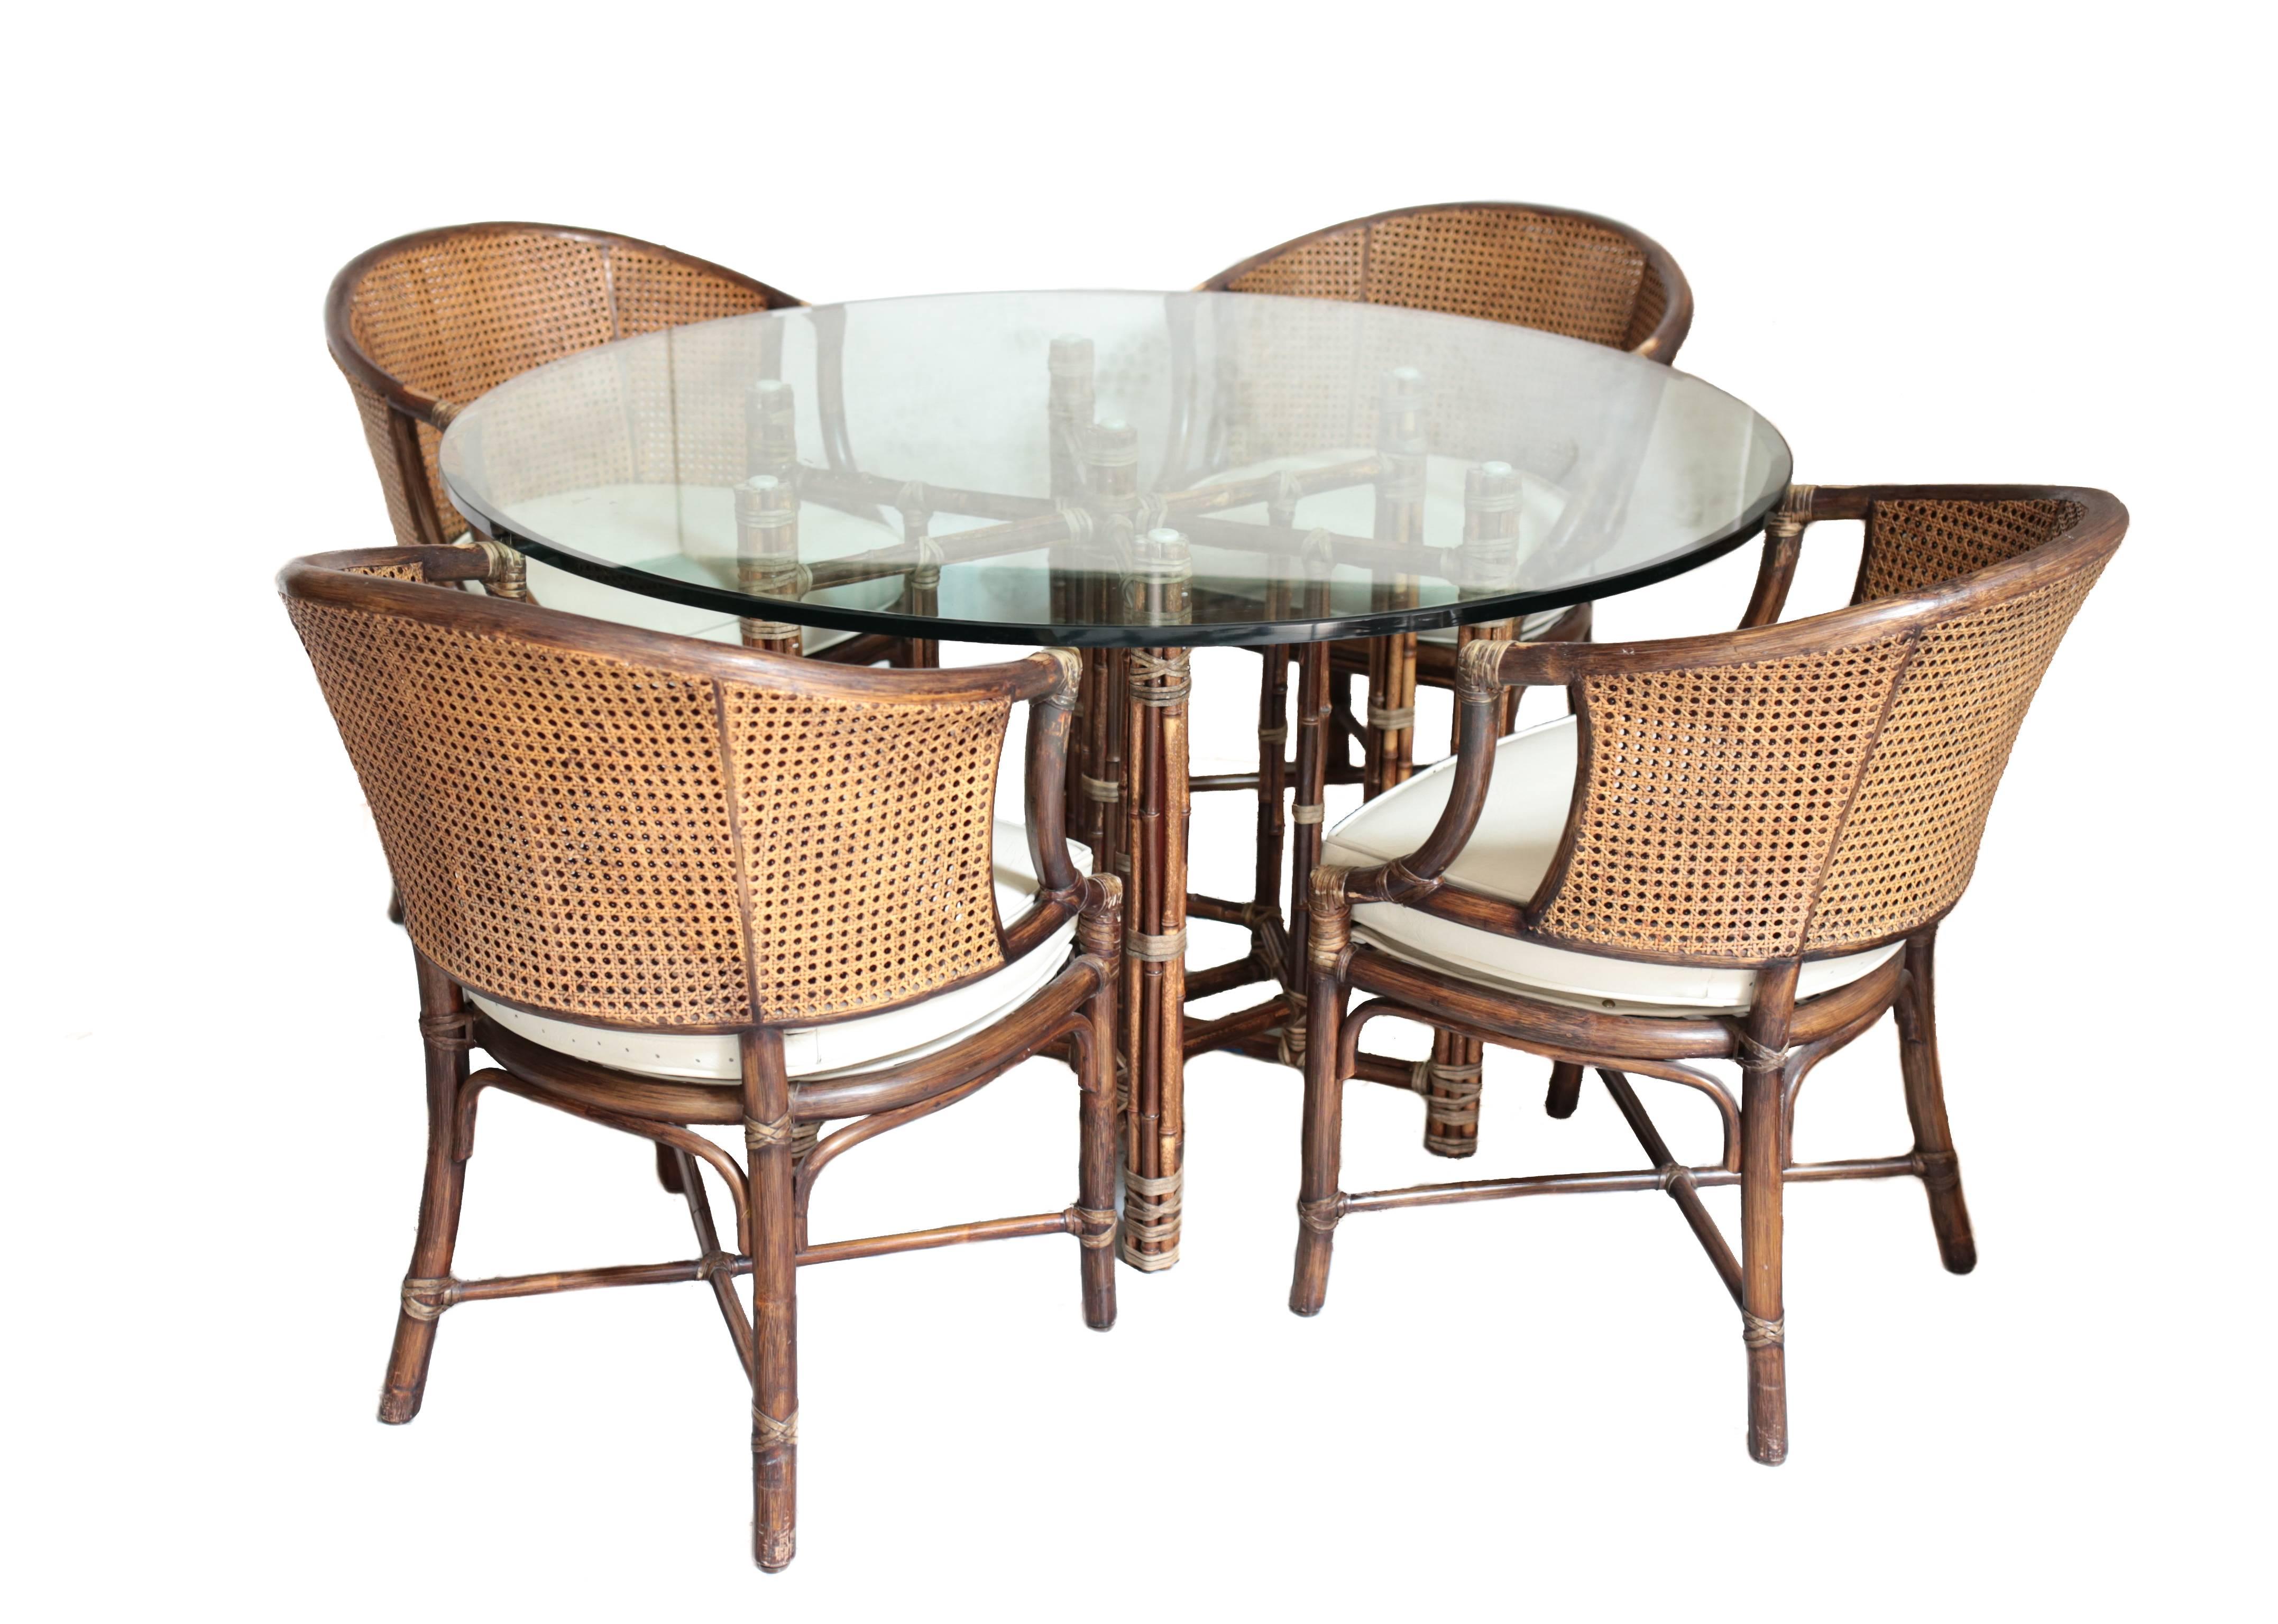 A stunning vintage bamboo and rattan dinner and chair set by McGuire. Comprised of a beautiful bamboo table with a large and thick circular glass panel tabletop. Four rattan backed chairs with white leather cushions, circa 1970.

Measures: The glass